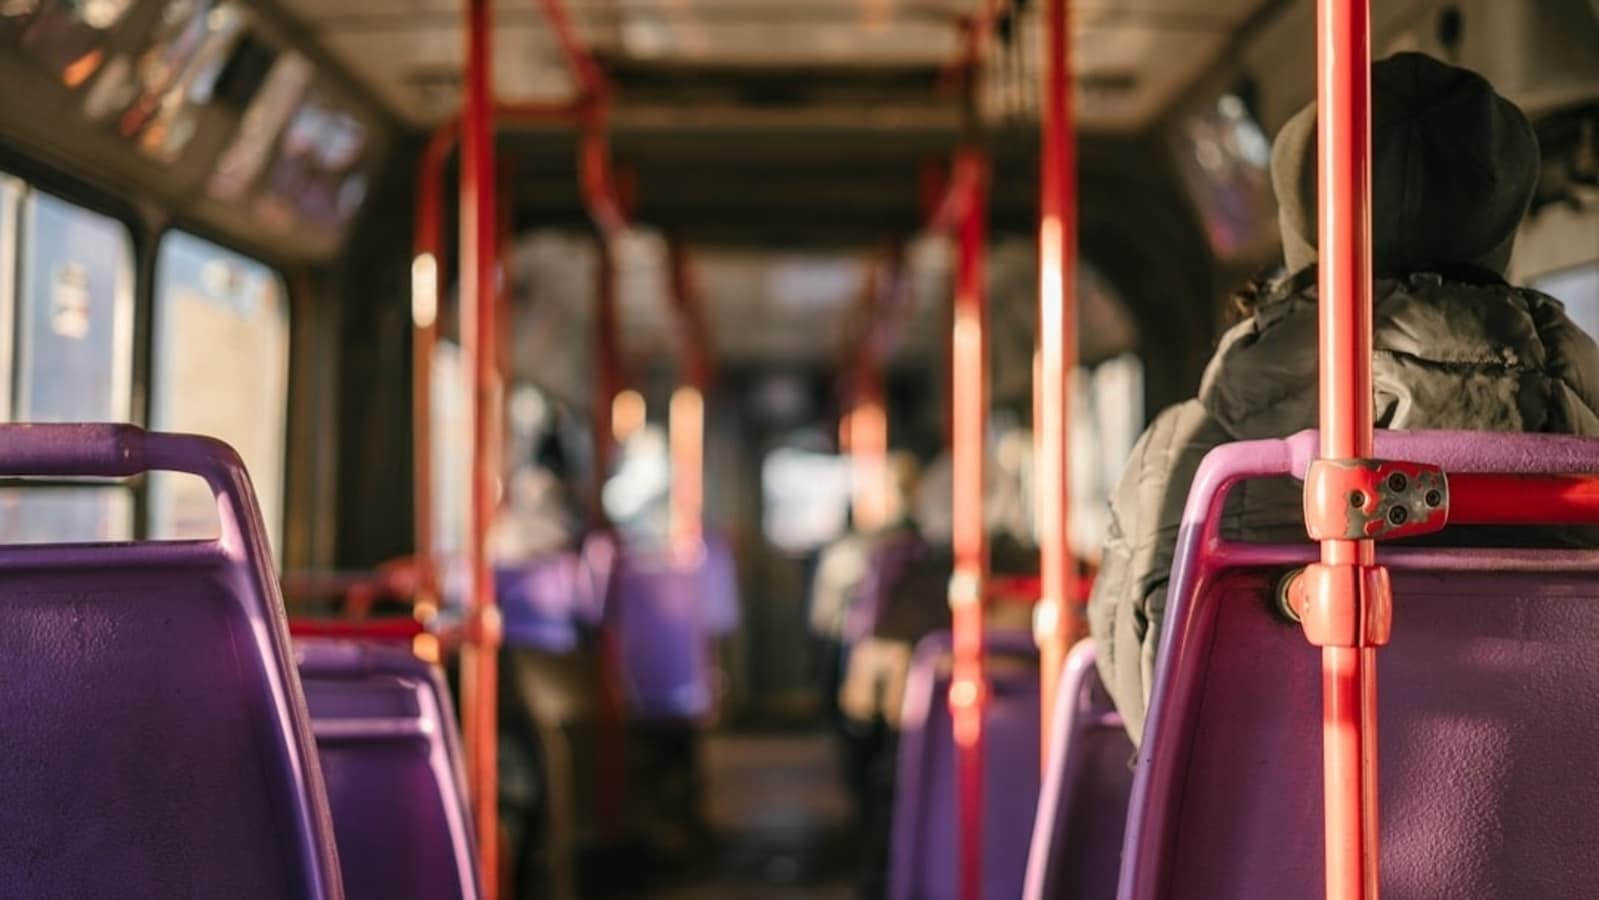 4-year-old girl taken to hospital after school staff forgot her on bus: 'Lucky to get our child alive'